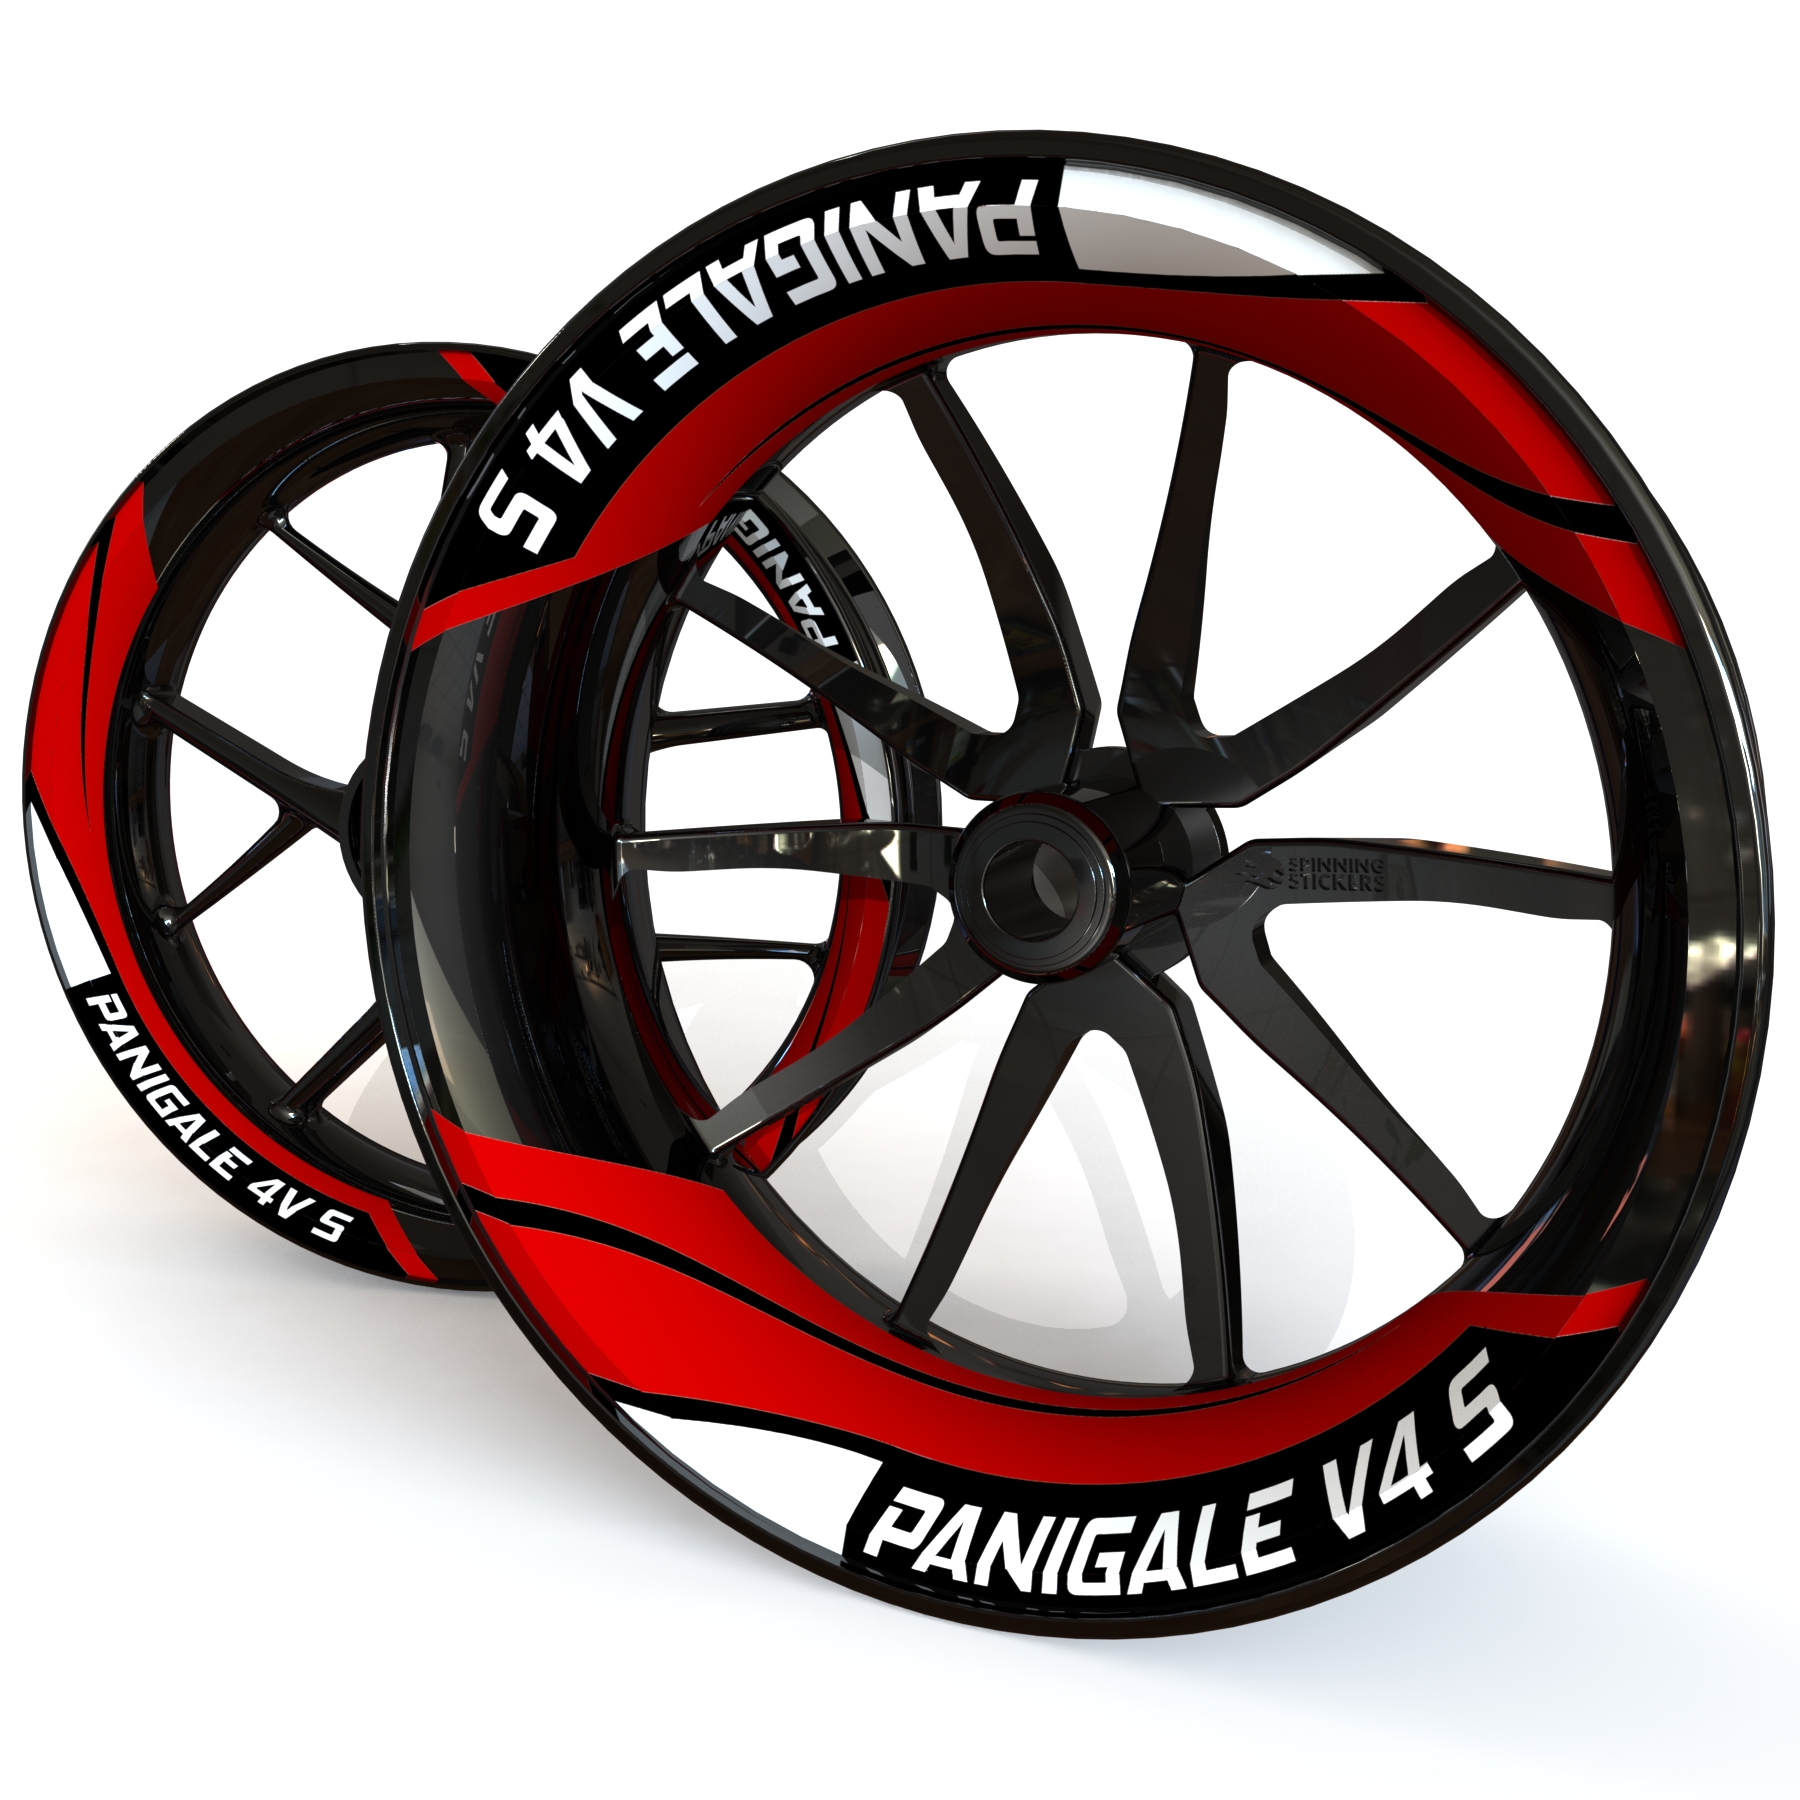 Ducati PANIGALE V4 S Wheel Stickers kit - Two Piece Design